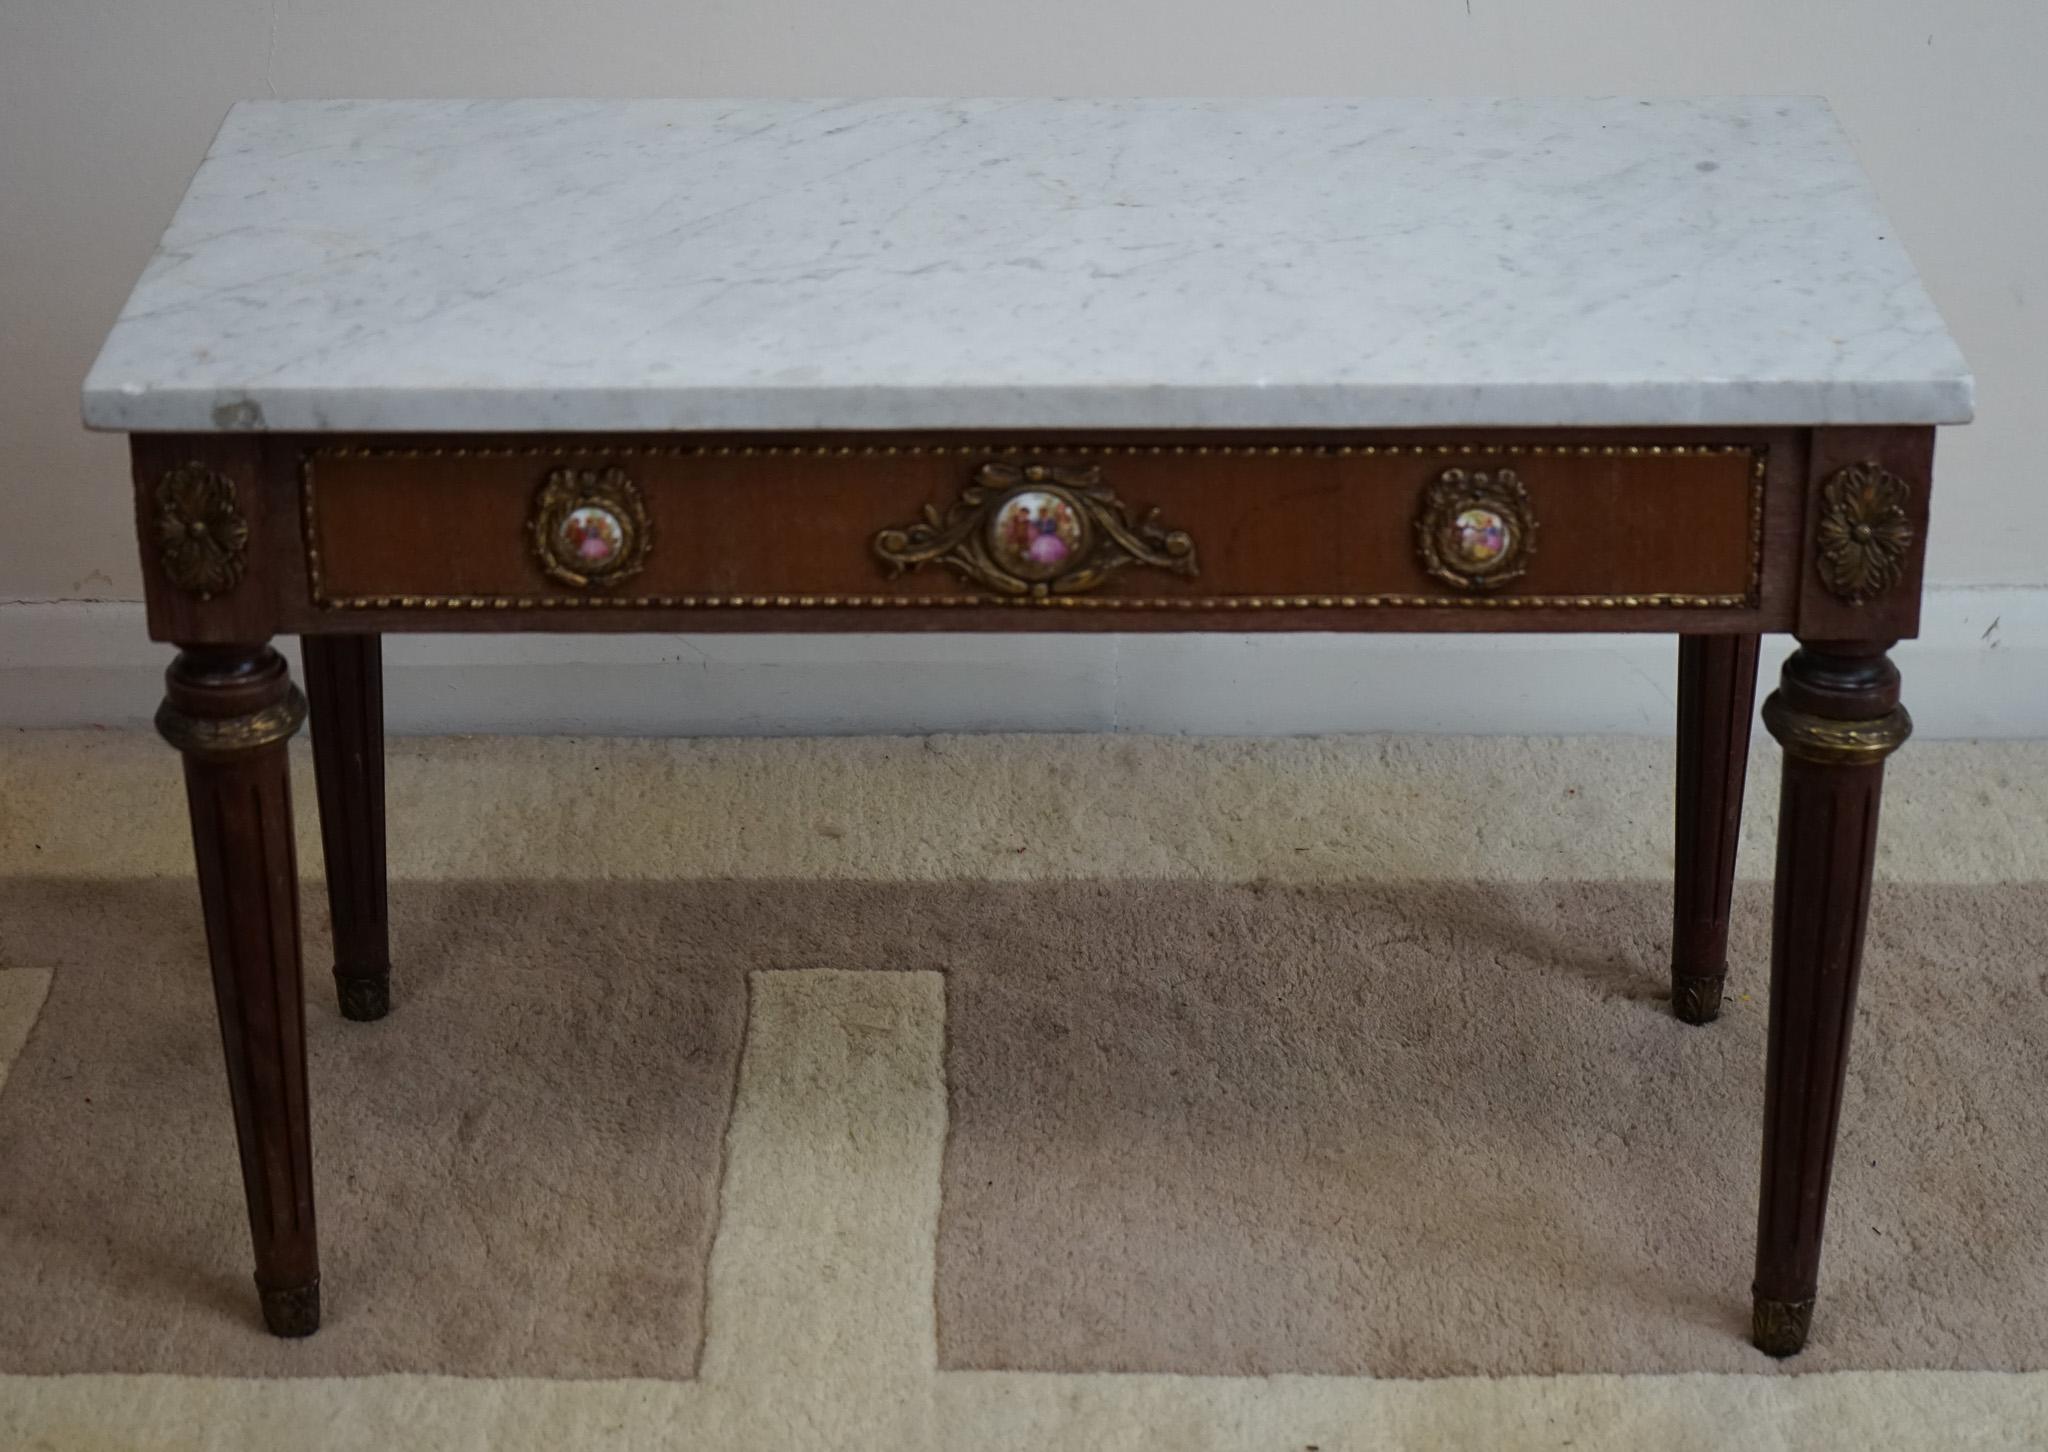 Antique French marble top  coffee table in good condition dating to around the 1930’s period. The marble top is original & in good condition too ( some chips on the corner )There are painted plaques surrounded by gilt bronze mounts all around the